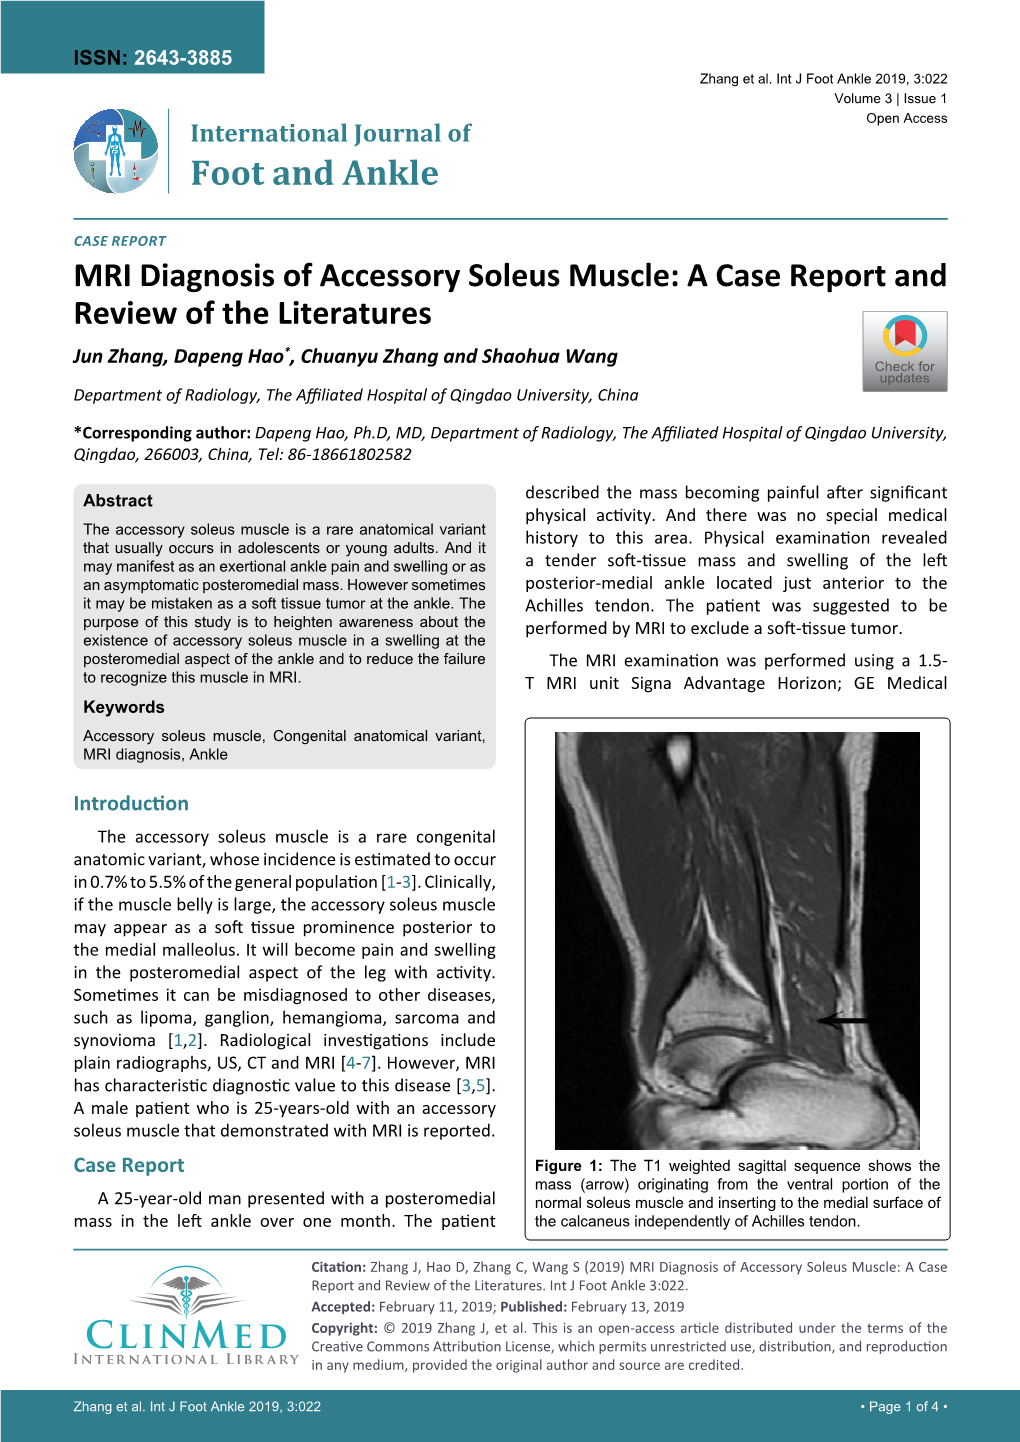 MRI Diagnosis of Accessory Soleus Muscle: a Case Report and Review of the Literatures